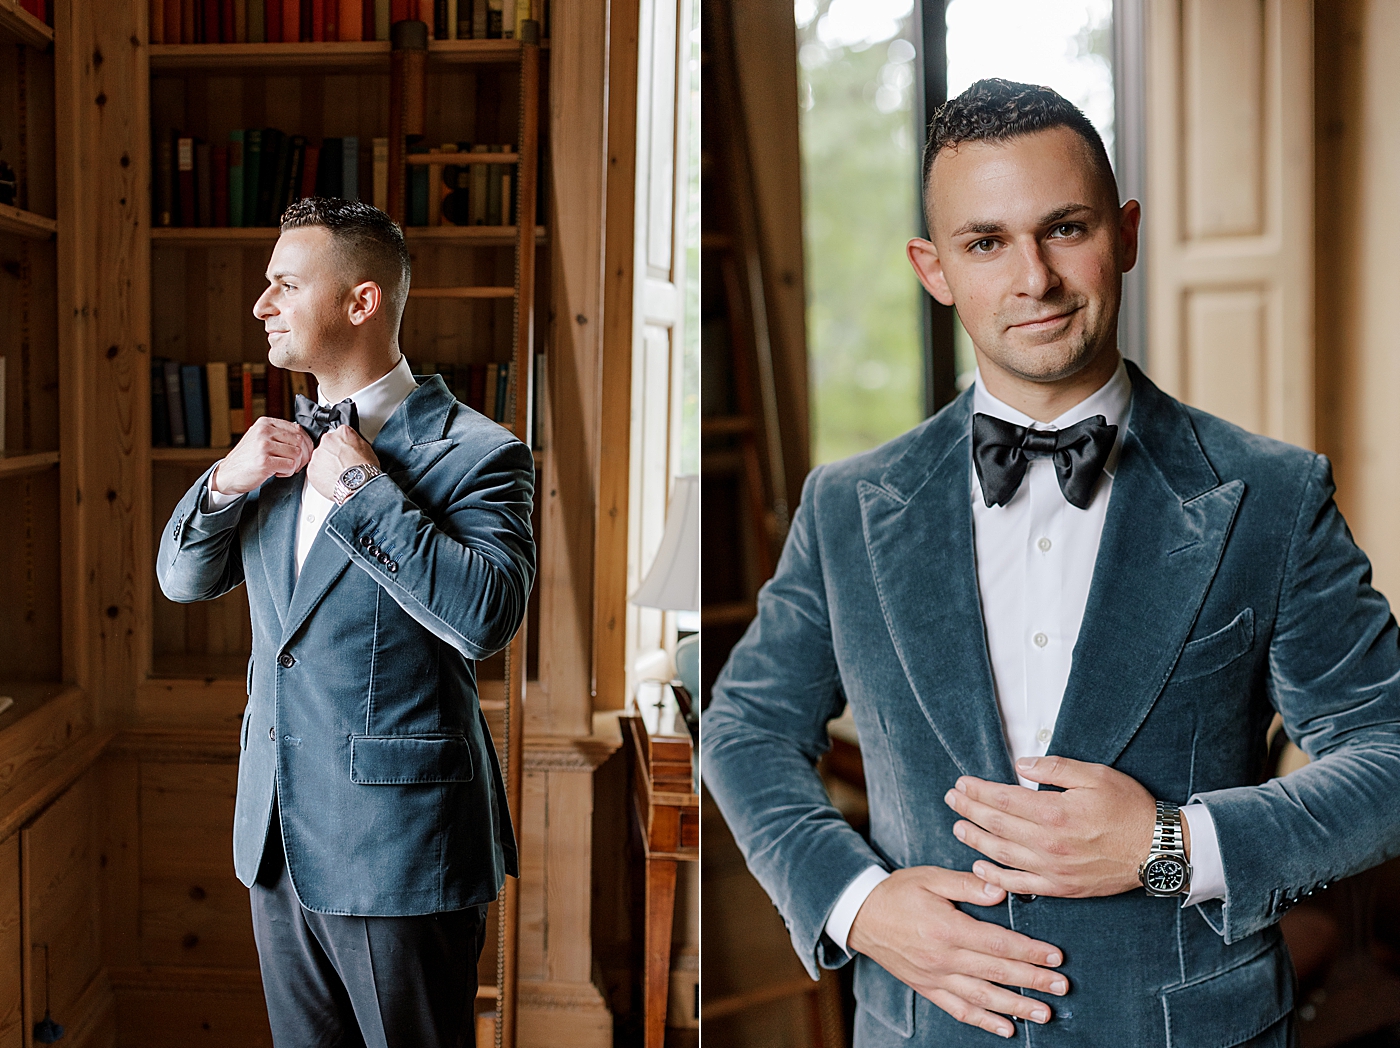 Groom getting ready | Image by Hope Helmuth Photography